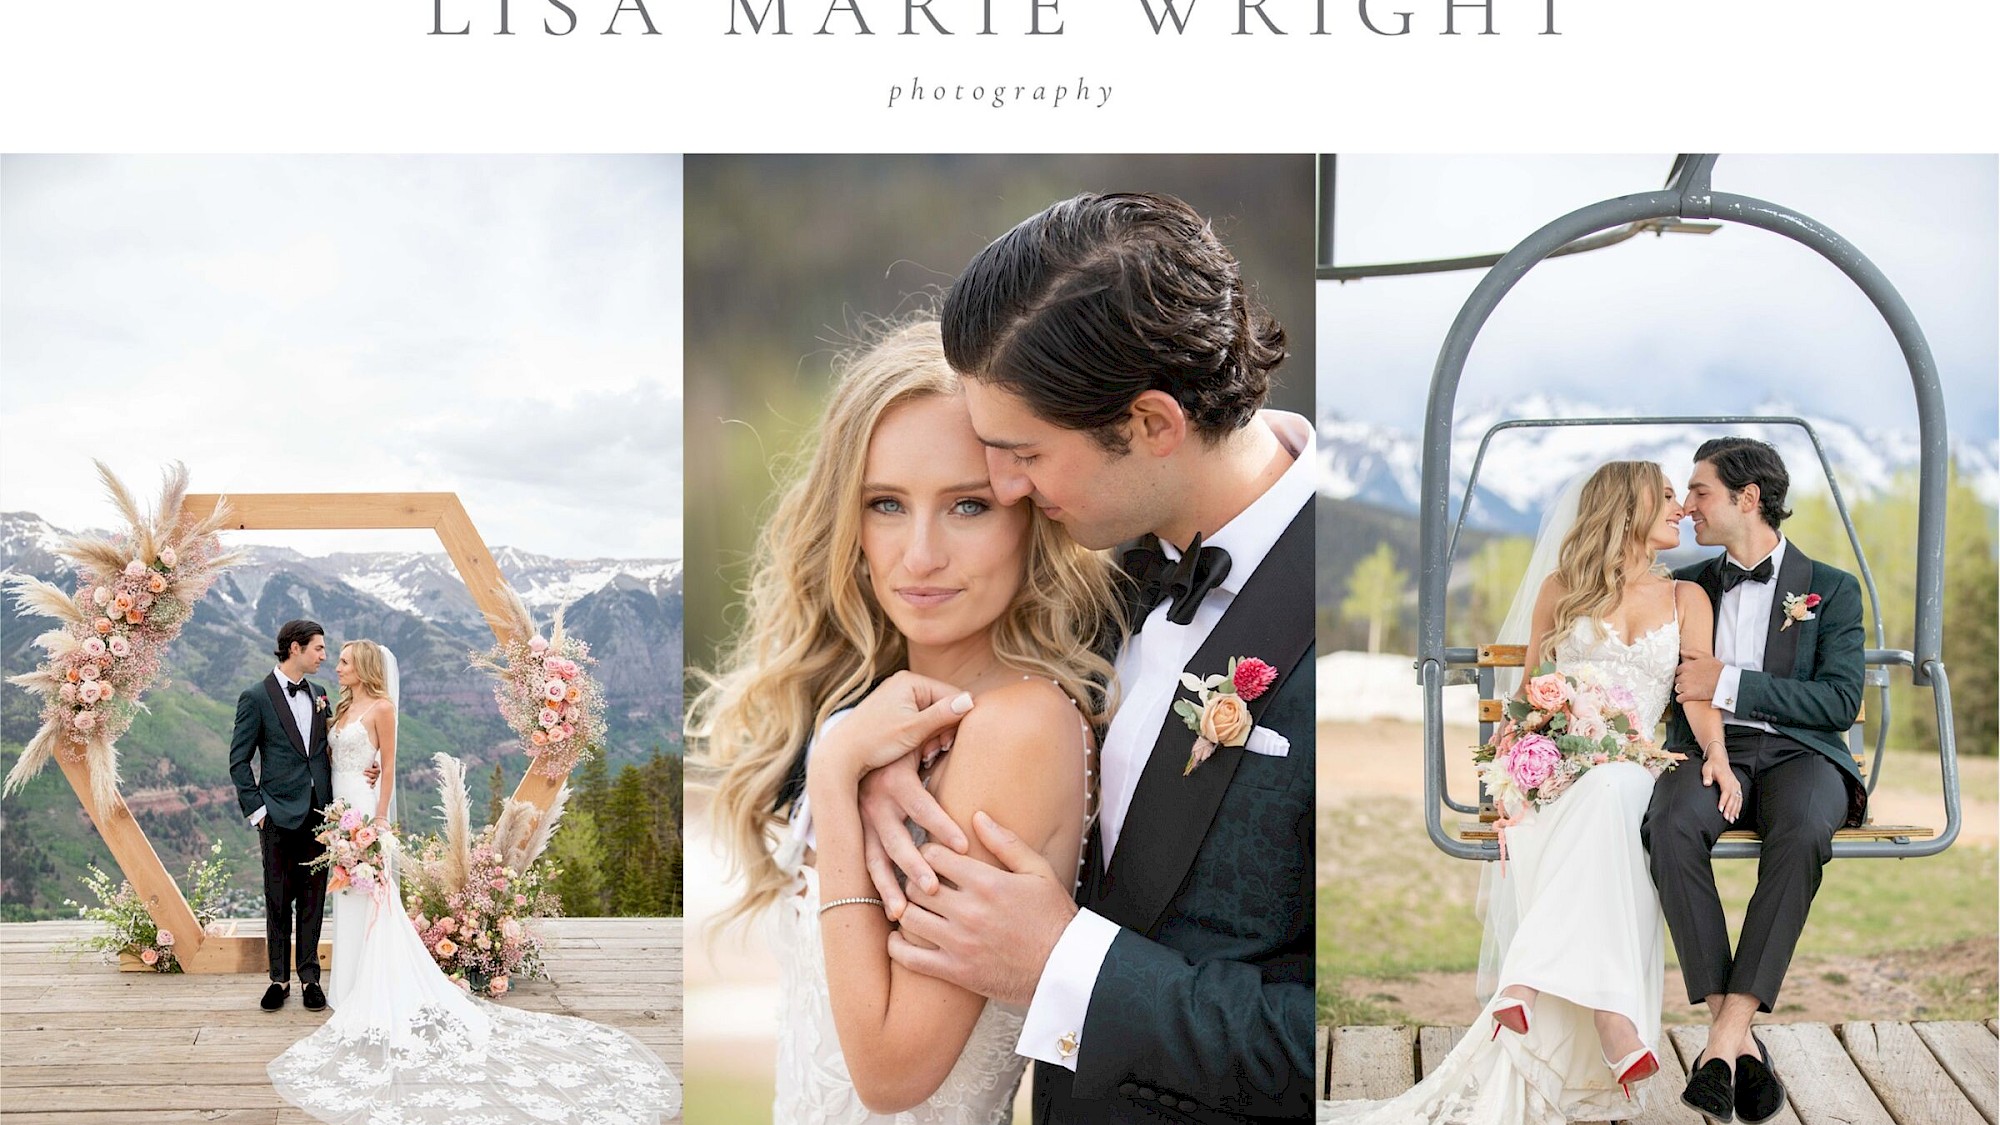 Lisa Marie Wright Photography